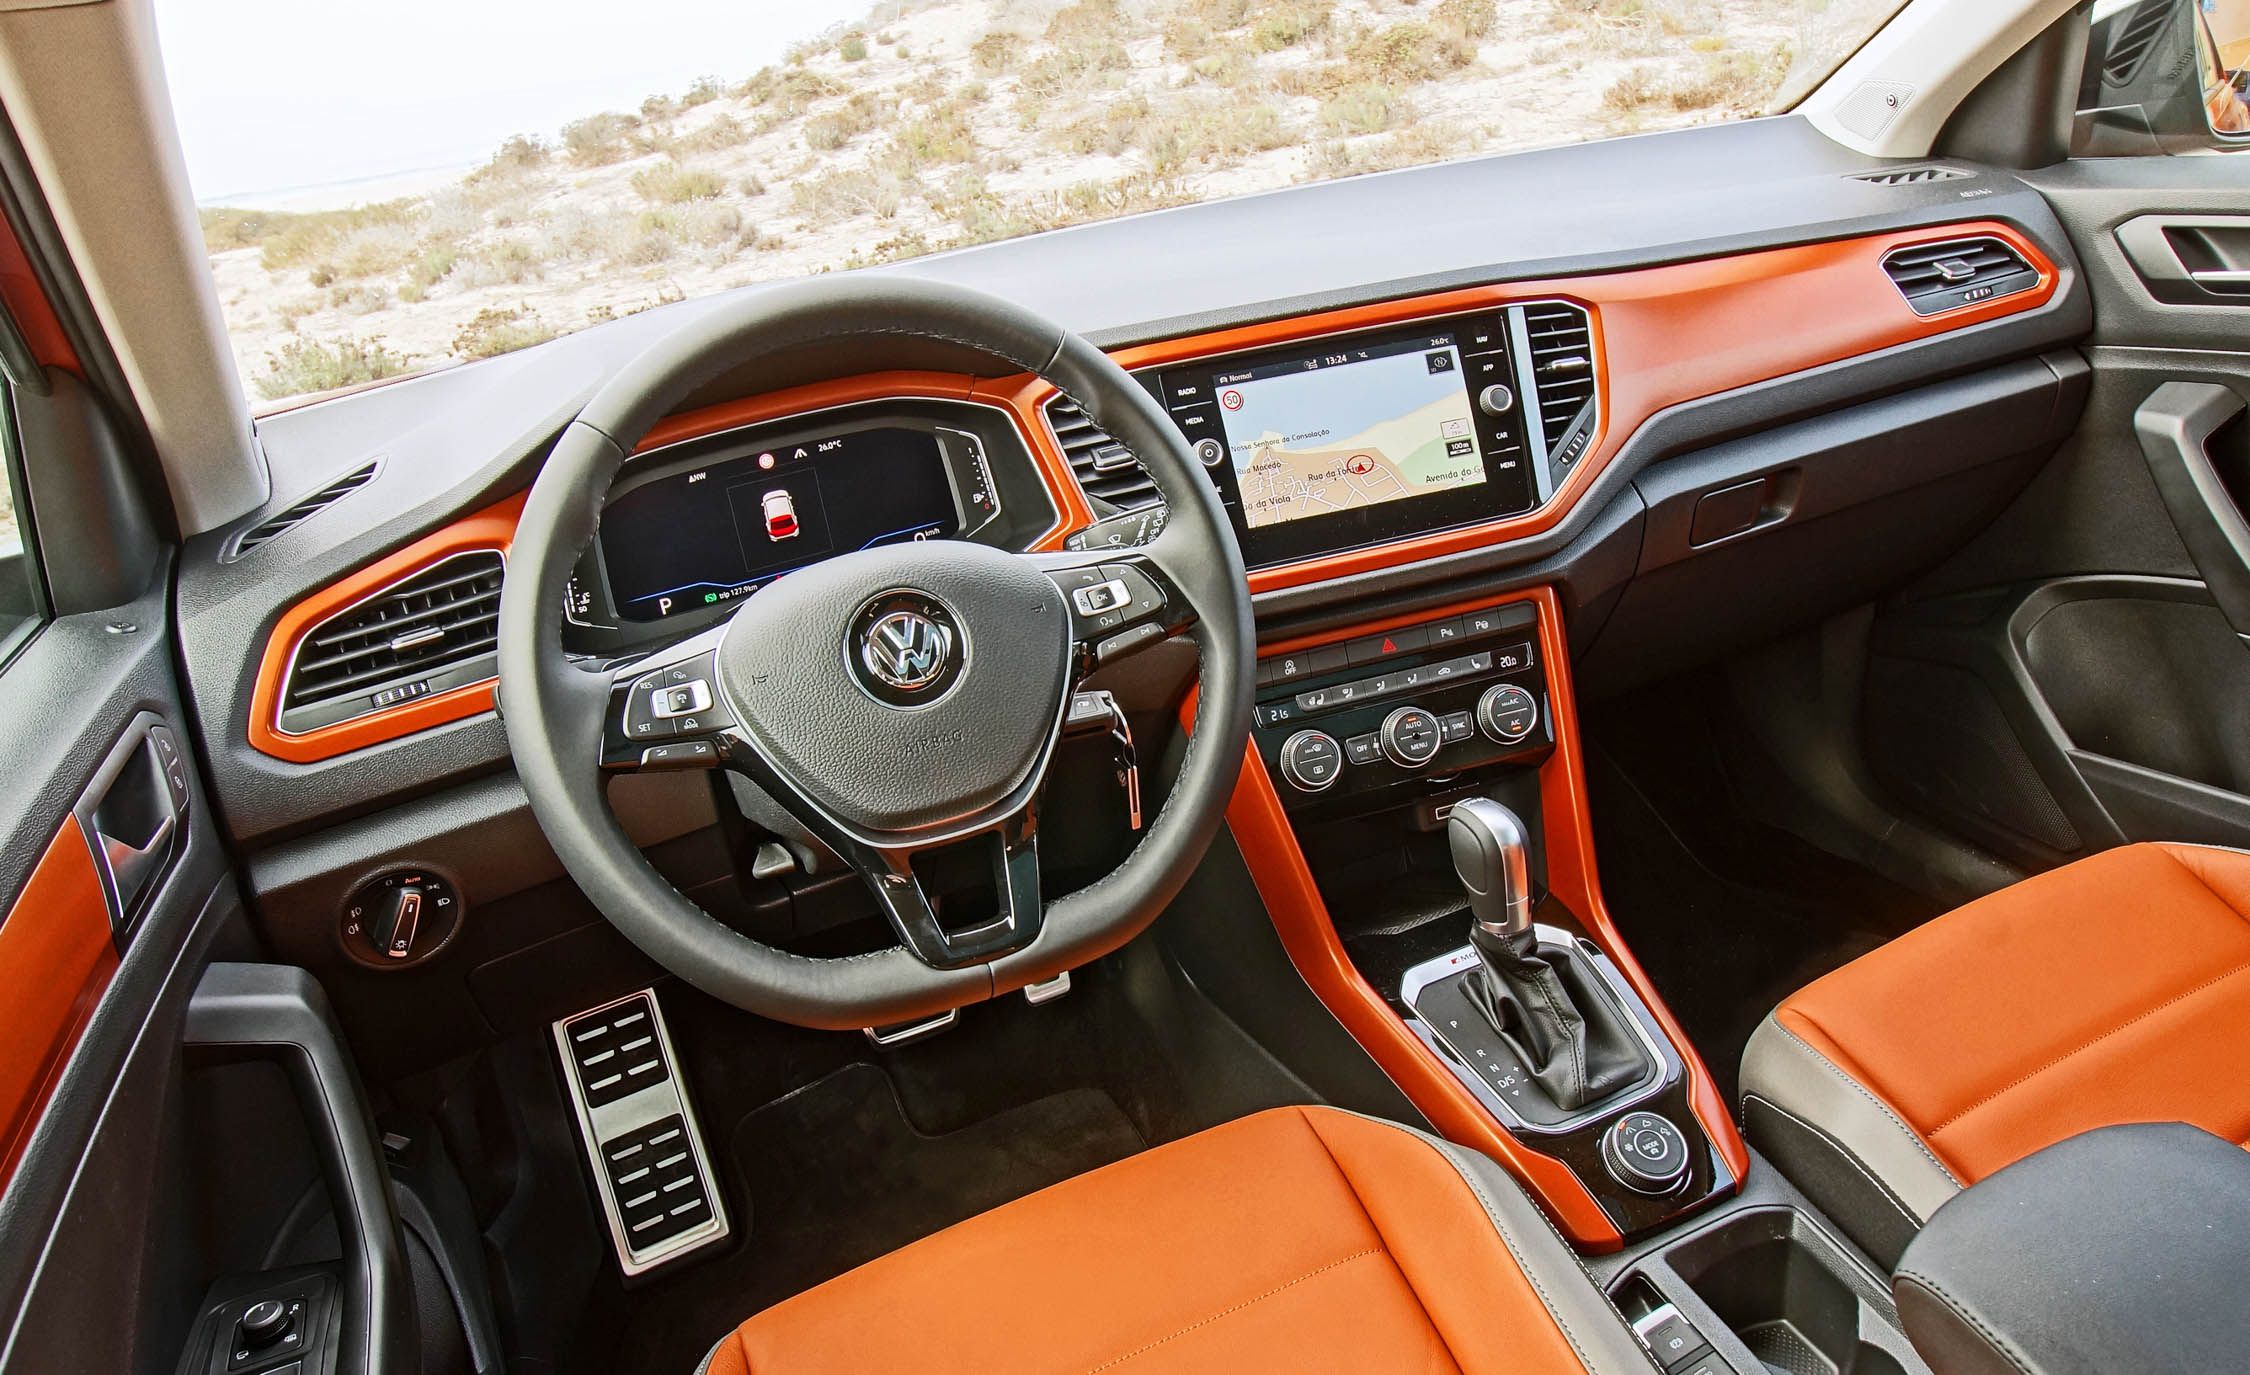 2018 Volkswagen T-Roc First Drive, Review